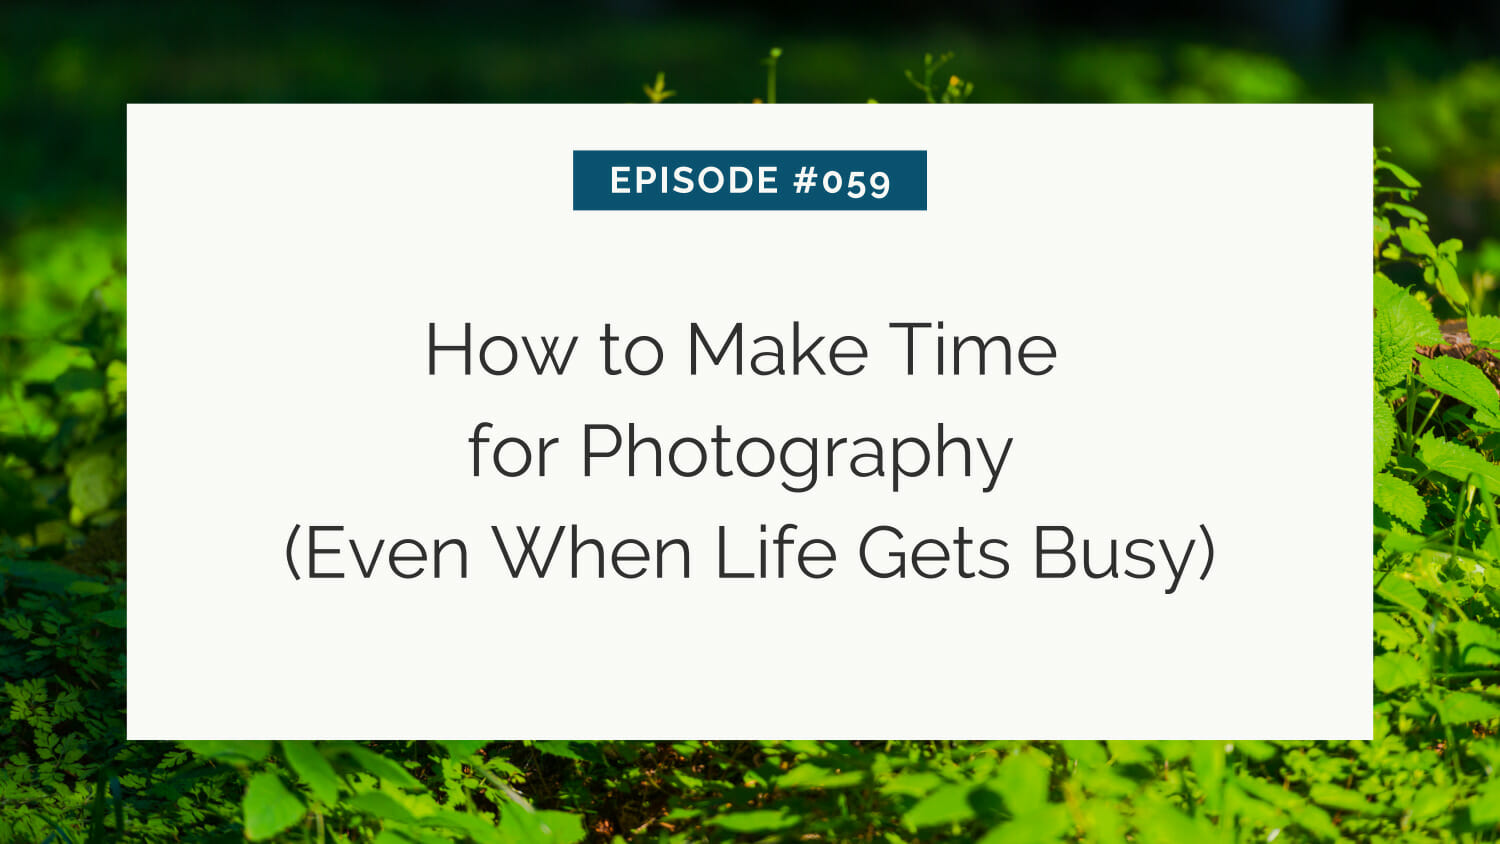 Title slide for a photography podcast episode titled "episode #059: how to make time for photography (even when life gets busy)" against a blurred greenery background.